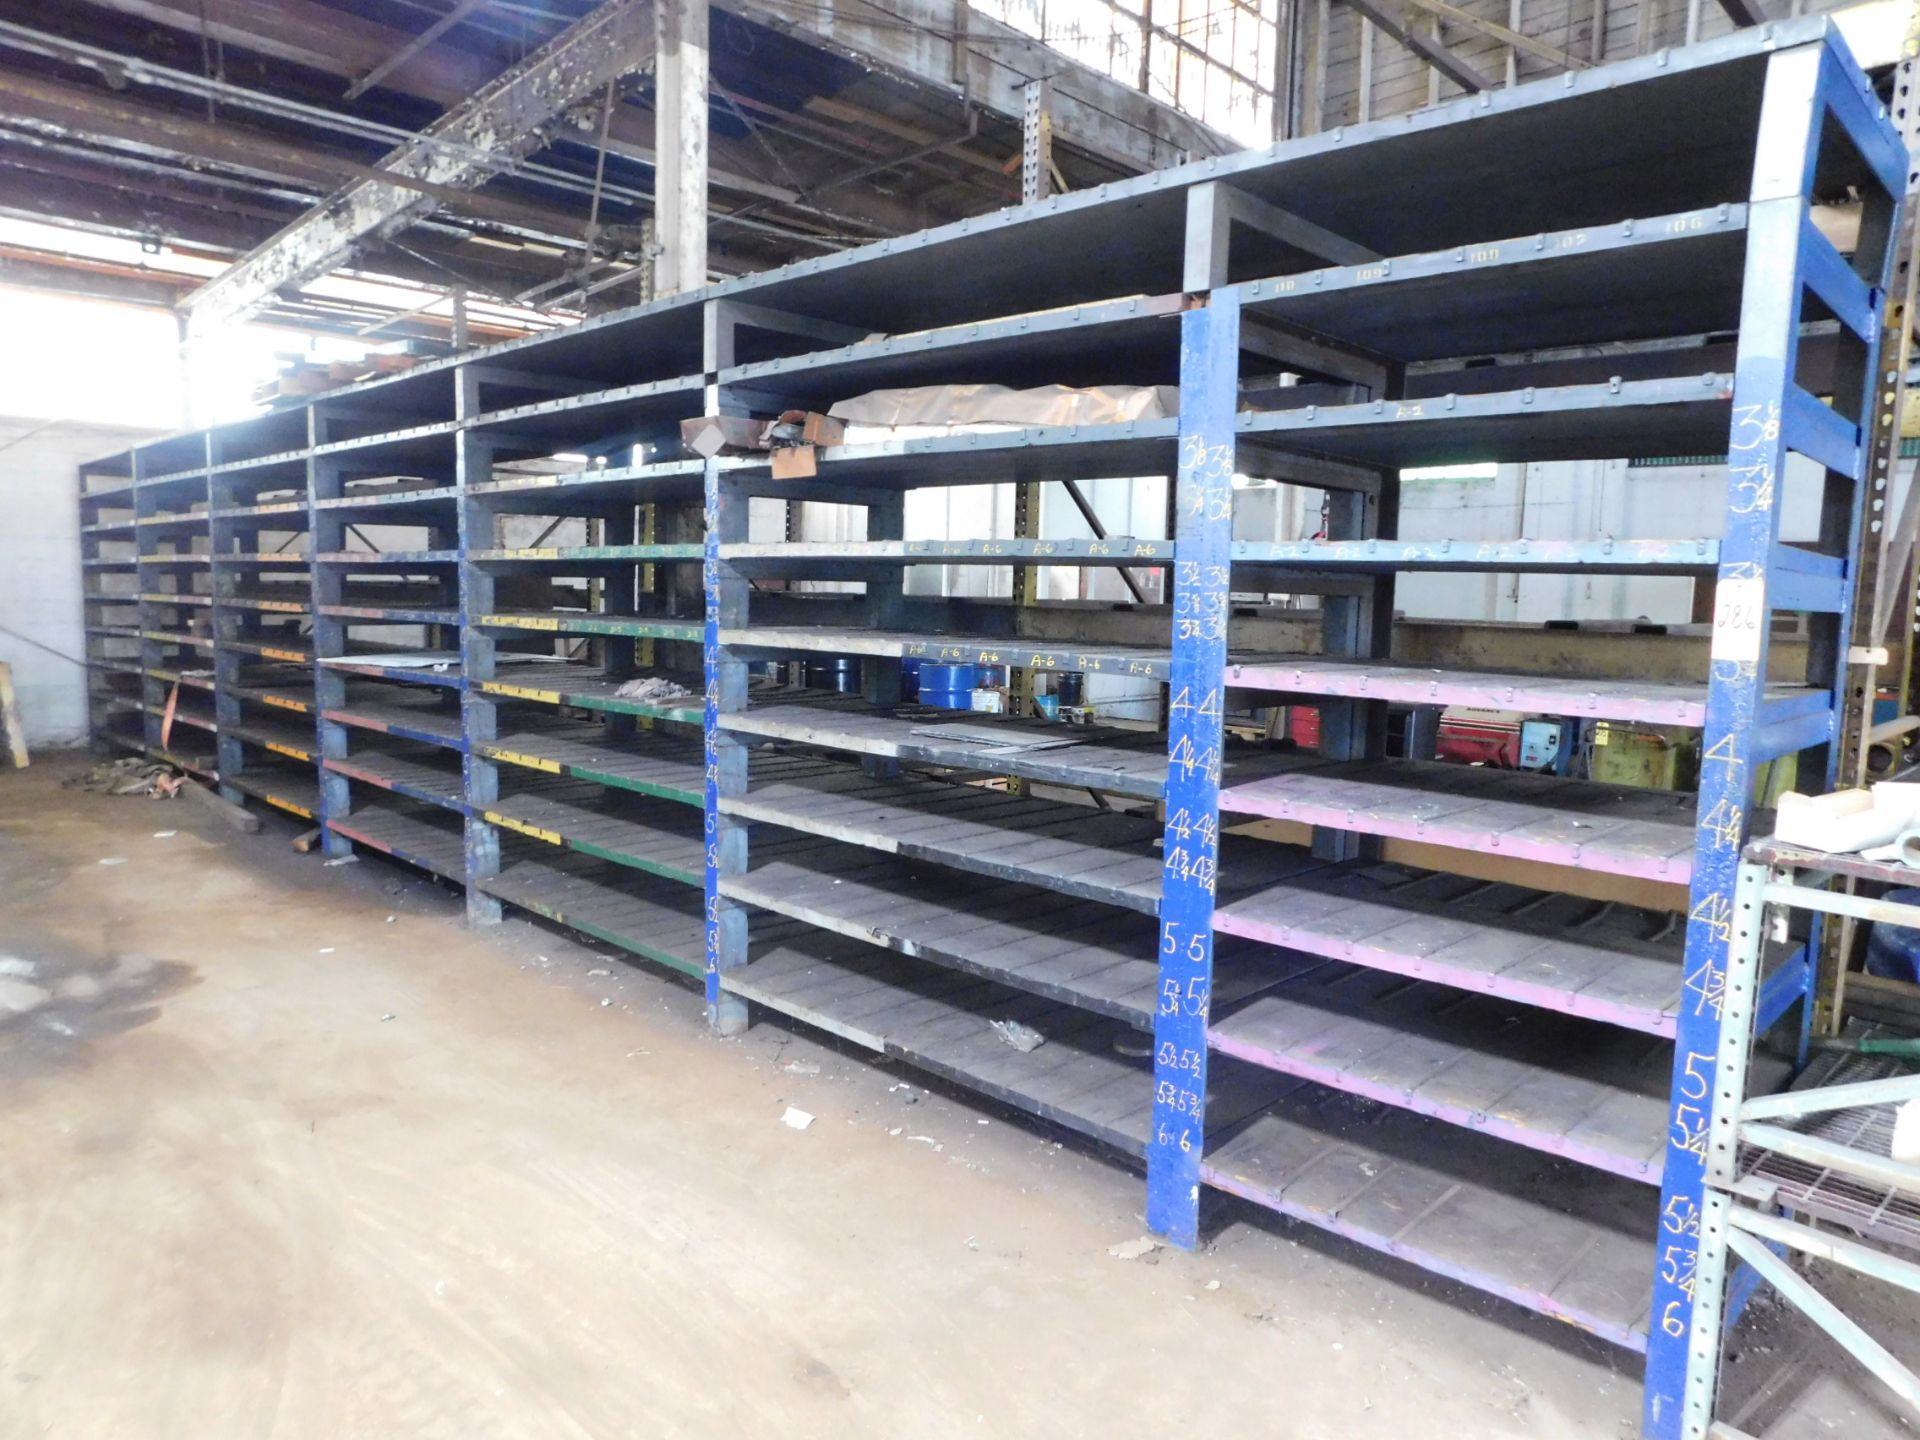 Shelving Unit, 6 Sections, 108" High X 80" Wide X 36" Deep, Bolt Together Construction